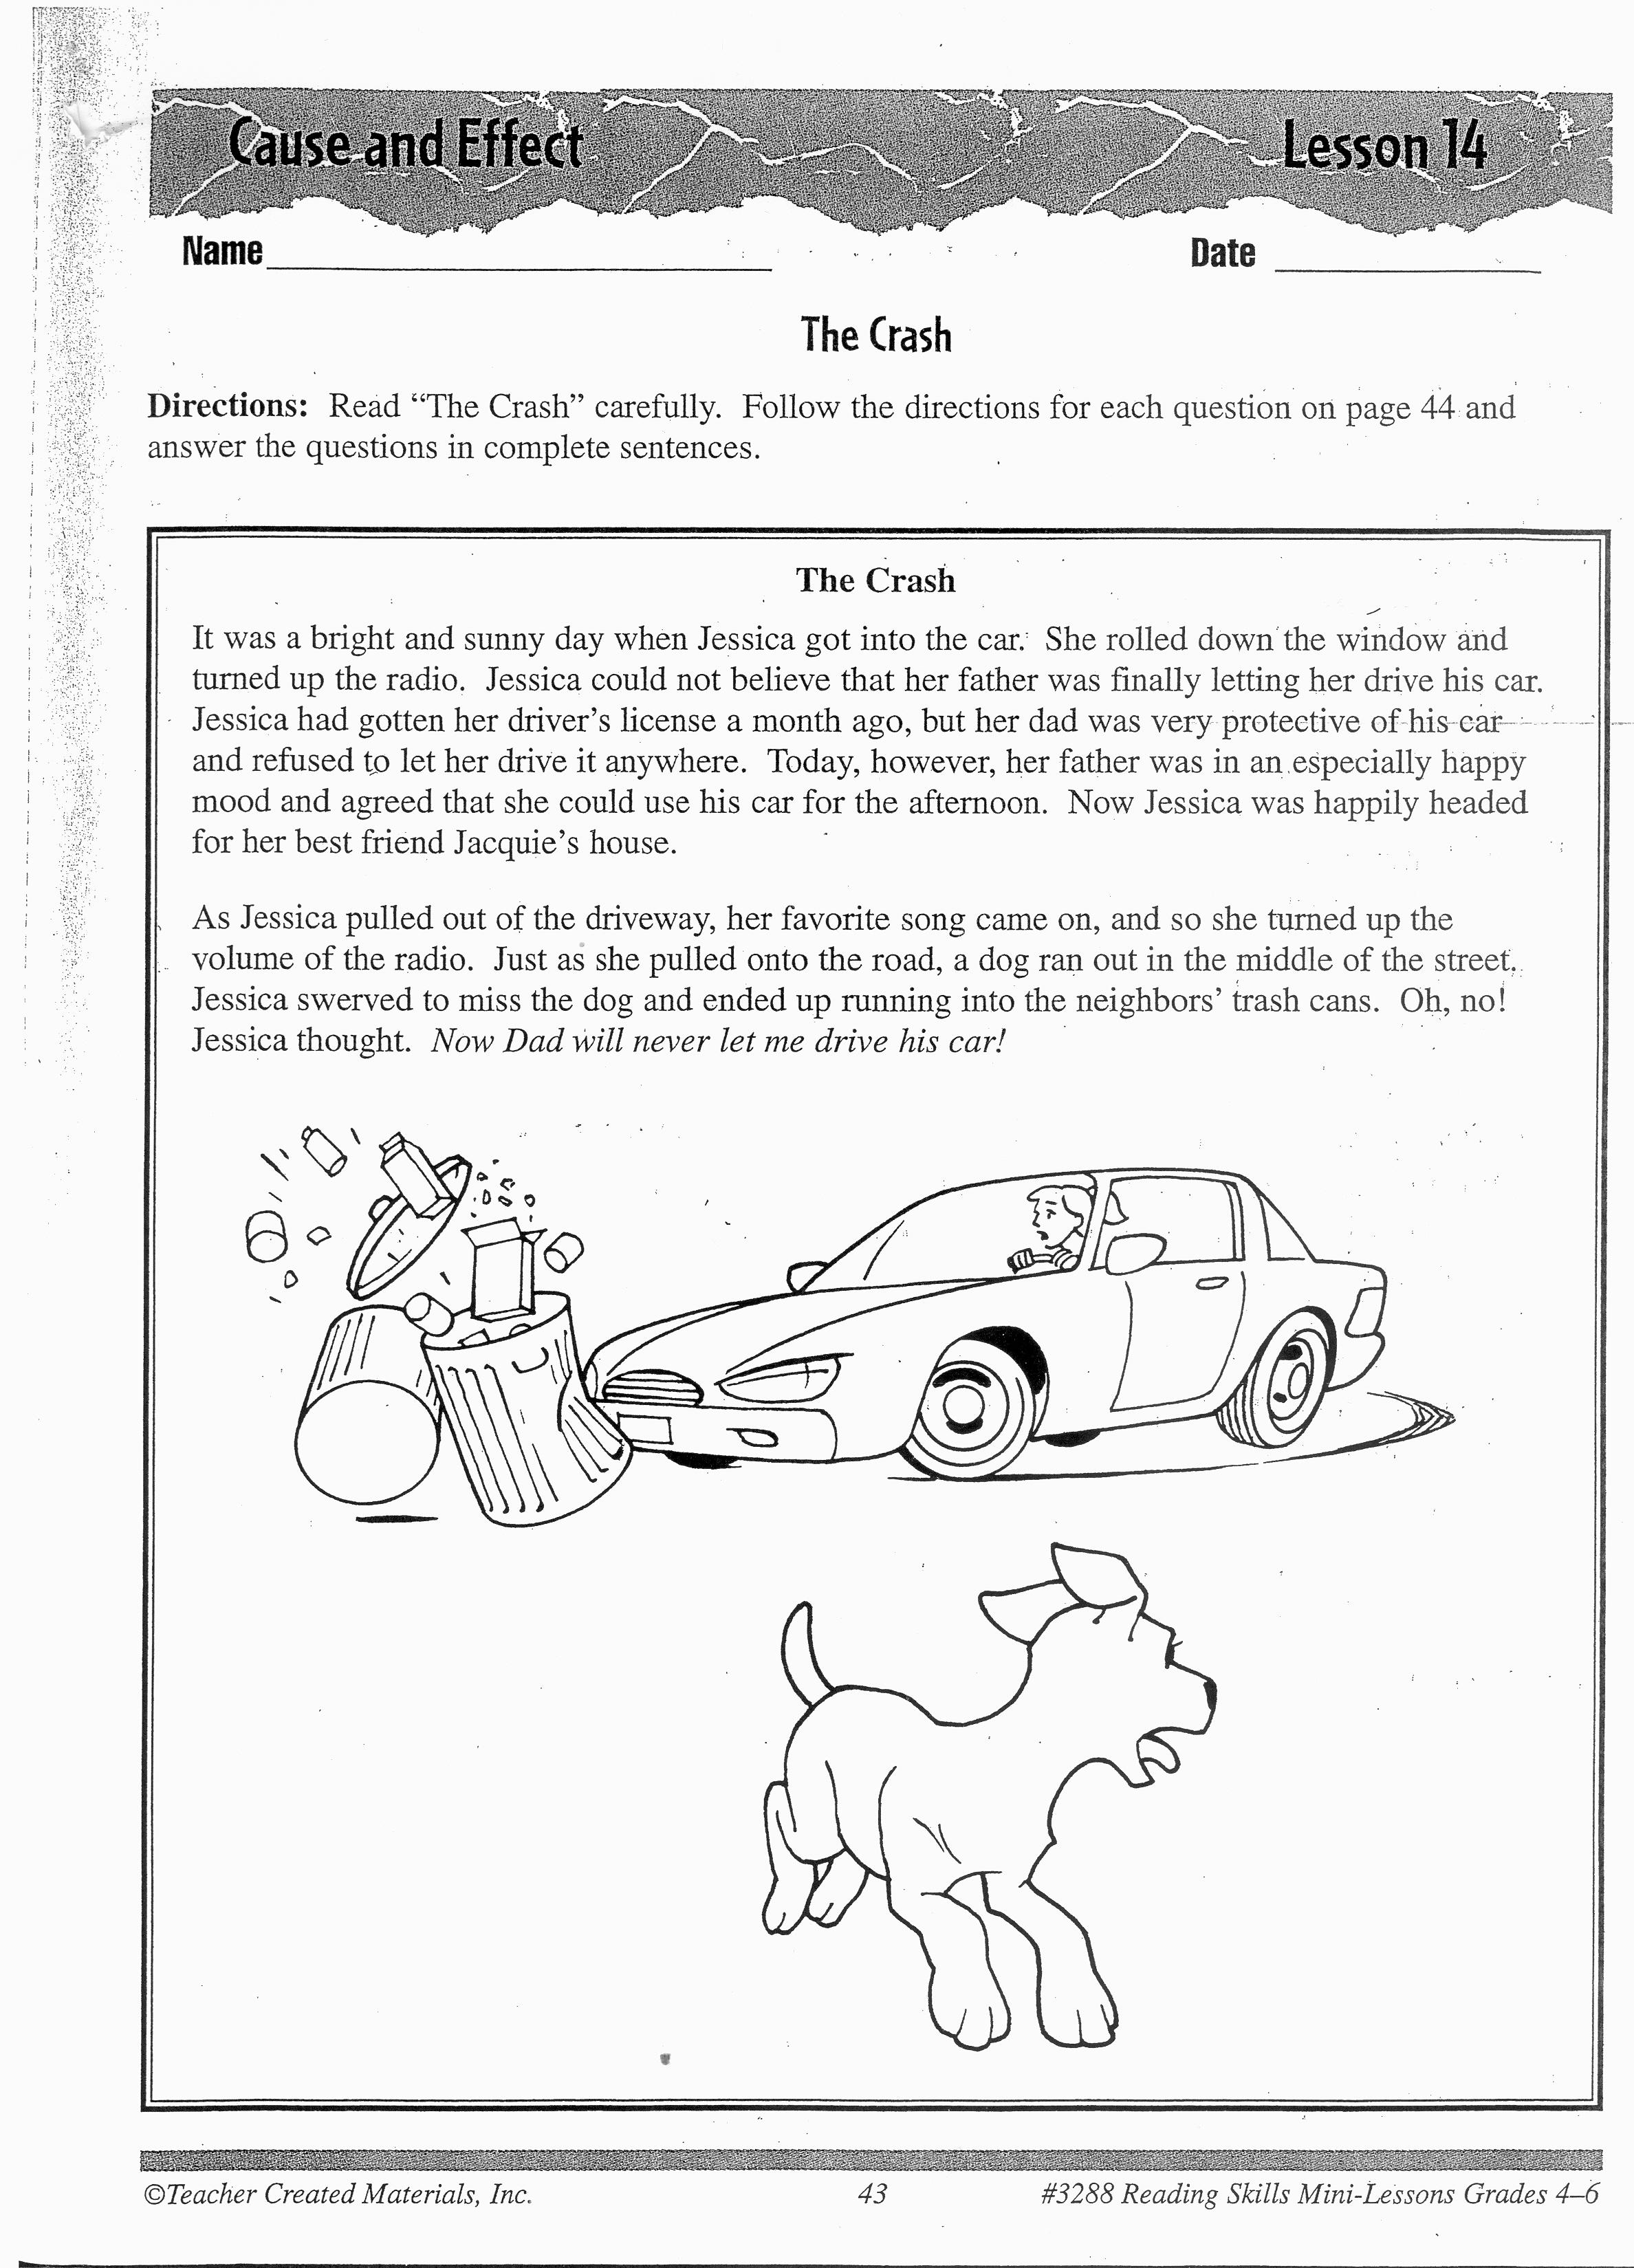 16 Best Images of Expository Essay Worksheets - 6th Grade Expository